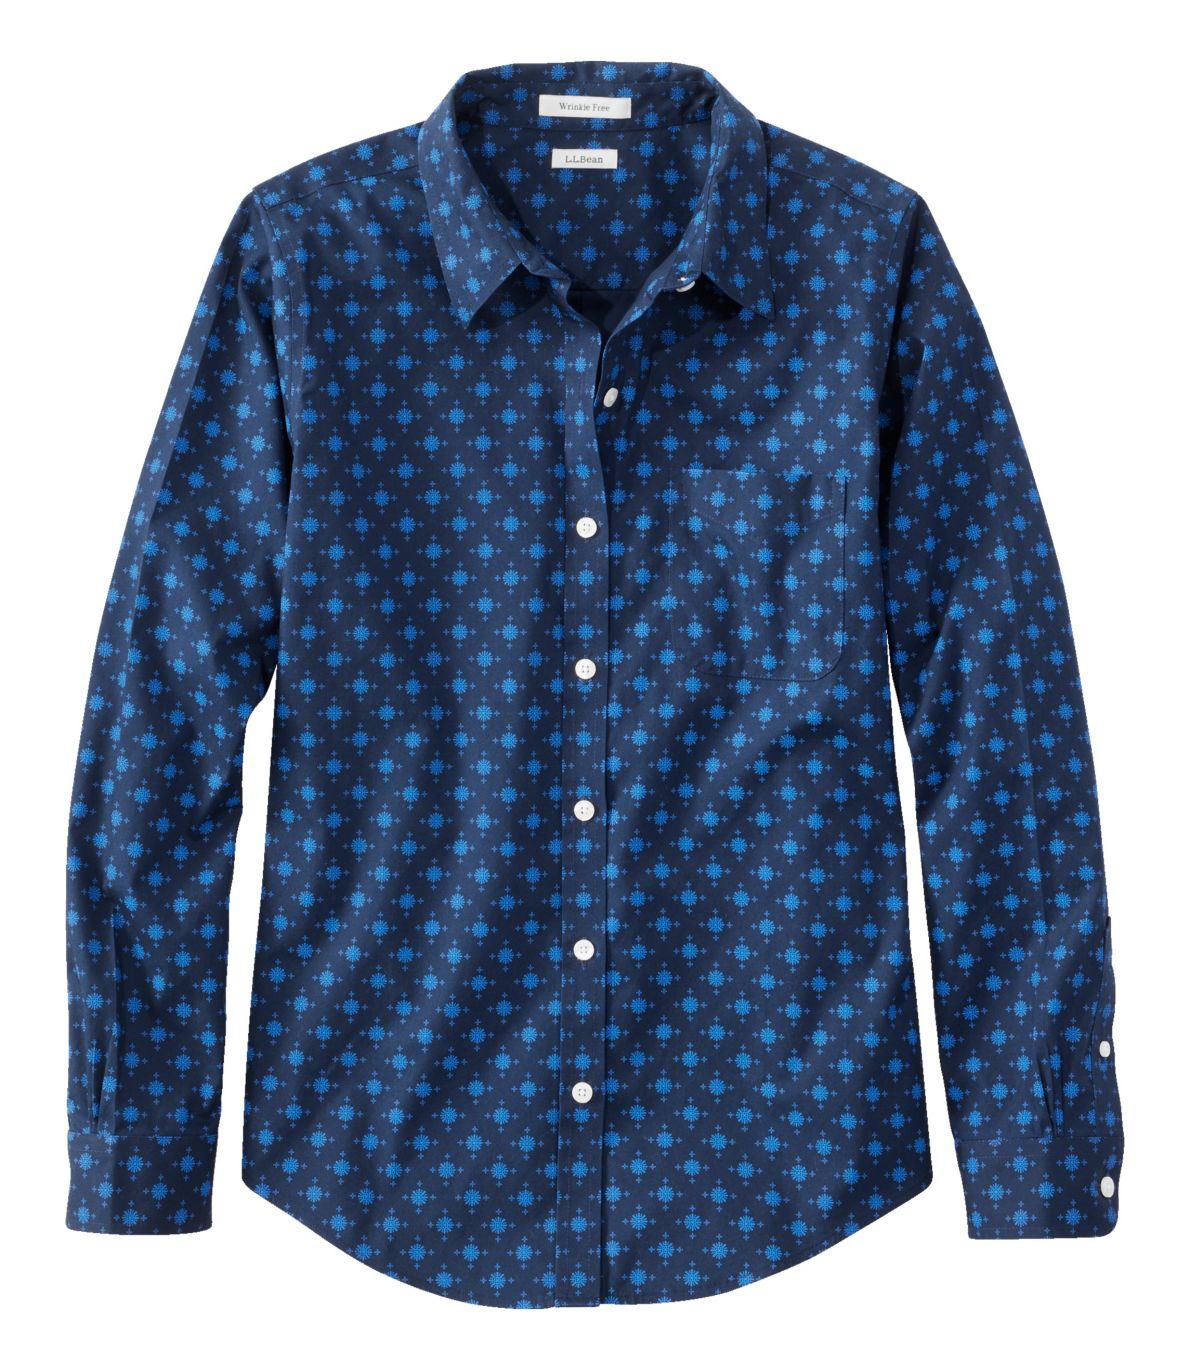 Women's Wrinkle-Free Pinpoint Oxford Shirt, Relaxed Fit Long-Sleeve Print